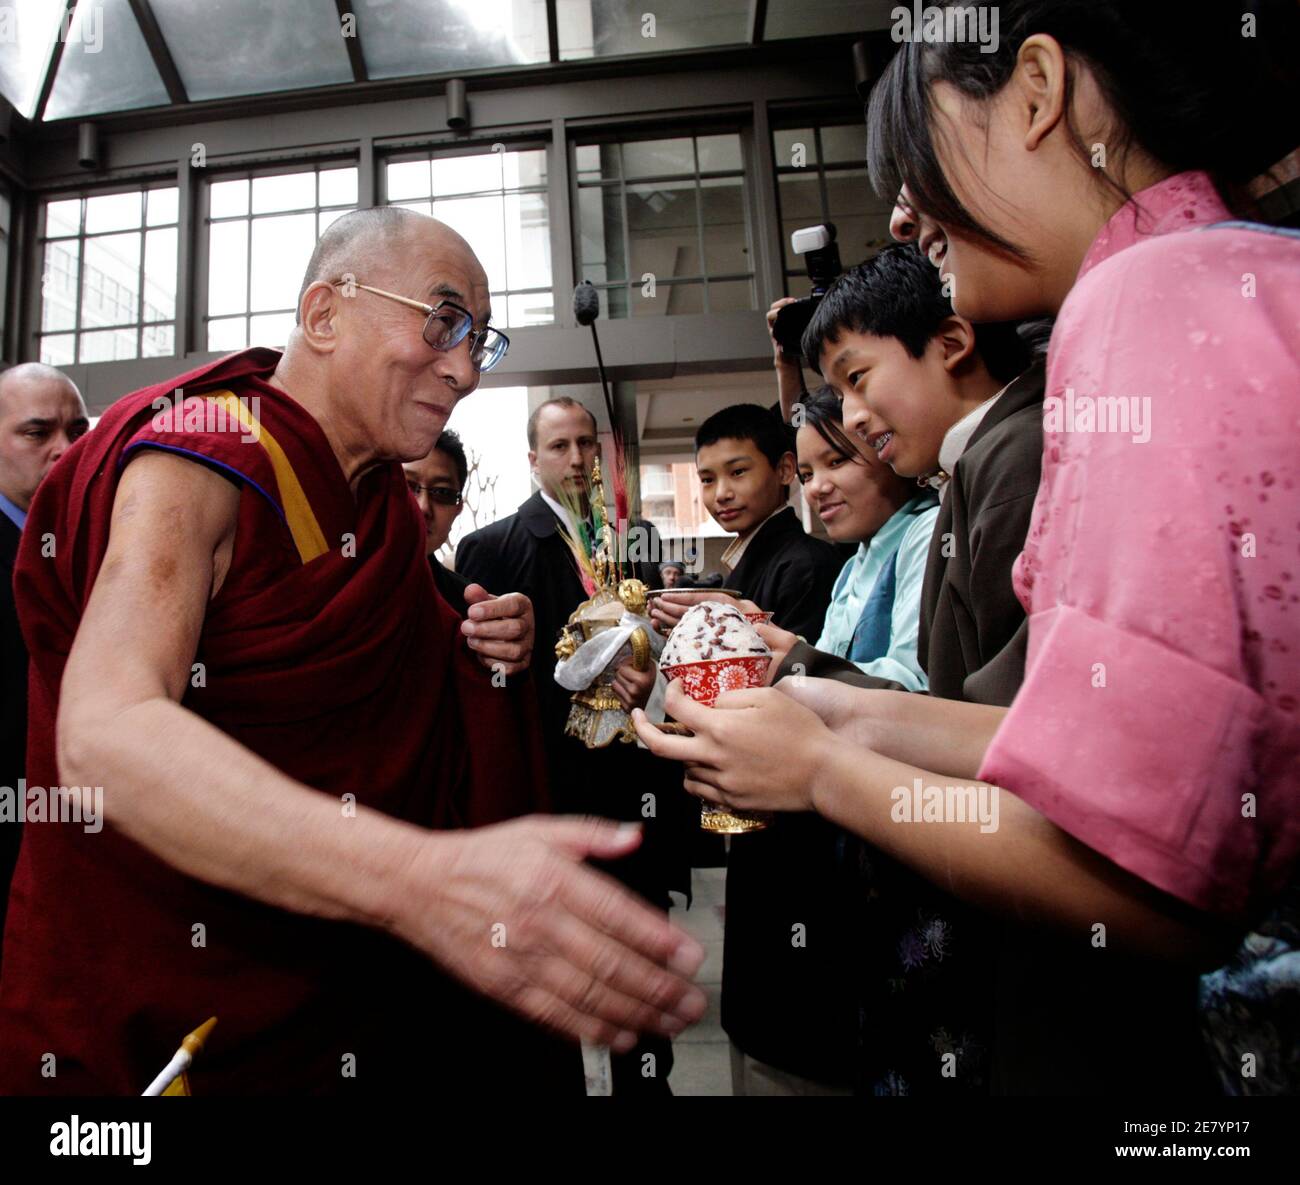 The Tibetan spiritual leader the Dalai Lama is greeted by members of the Tibetan community as he arrives at a hotel in Washington February 17, 2010. U.S. President Barack Obama plans to meet the Dalai Lama on February 18, a move that has been denounced by China. The Obama administration delayed meeting the Dalai Lama, who has lived in exile since a failed Tibetan uprising in 1959, until after Obama's November visit to Beijing so as not to inflame tensions with China, which accuses the monk of separatism. REUTERS/Yuri Gripas (UNITED STATES - Tags: POLITICS RELIGION) Stock Photo